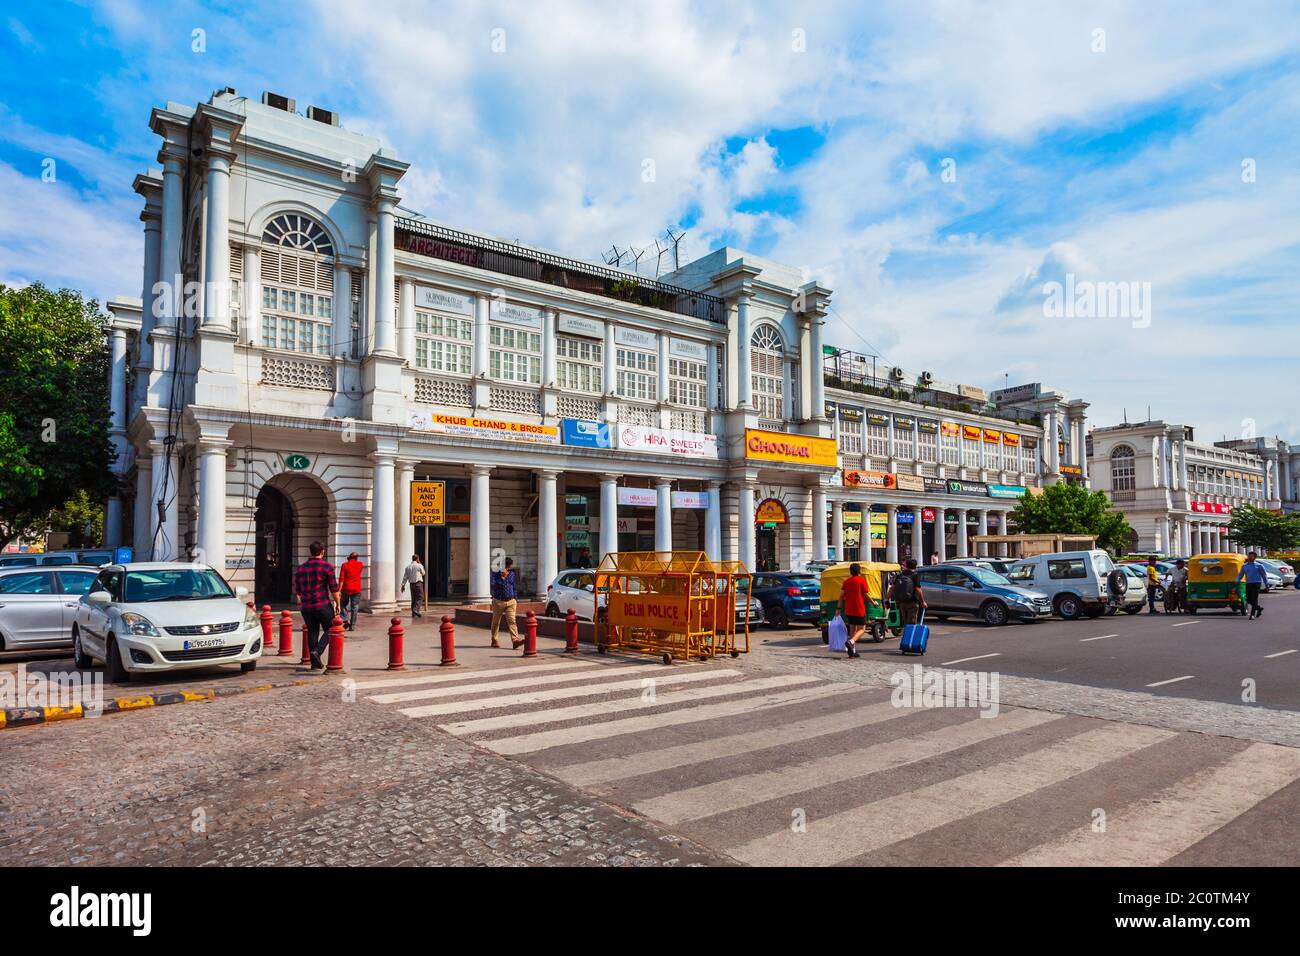 NEW DELHI, INDIA - SEPTEMBER 26, 2019: Connaught Place or CP is one of the largest financial, commercial and business centres in New Delhi, India. Stock Photo